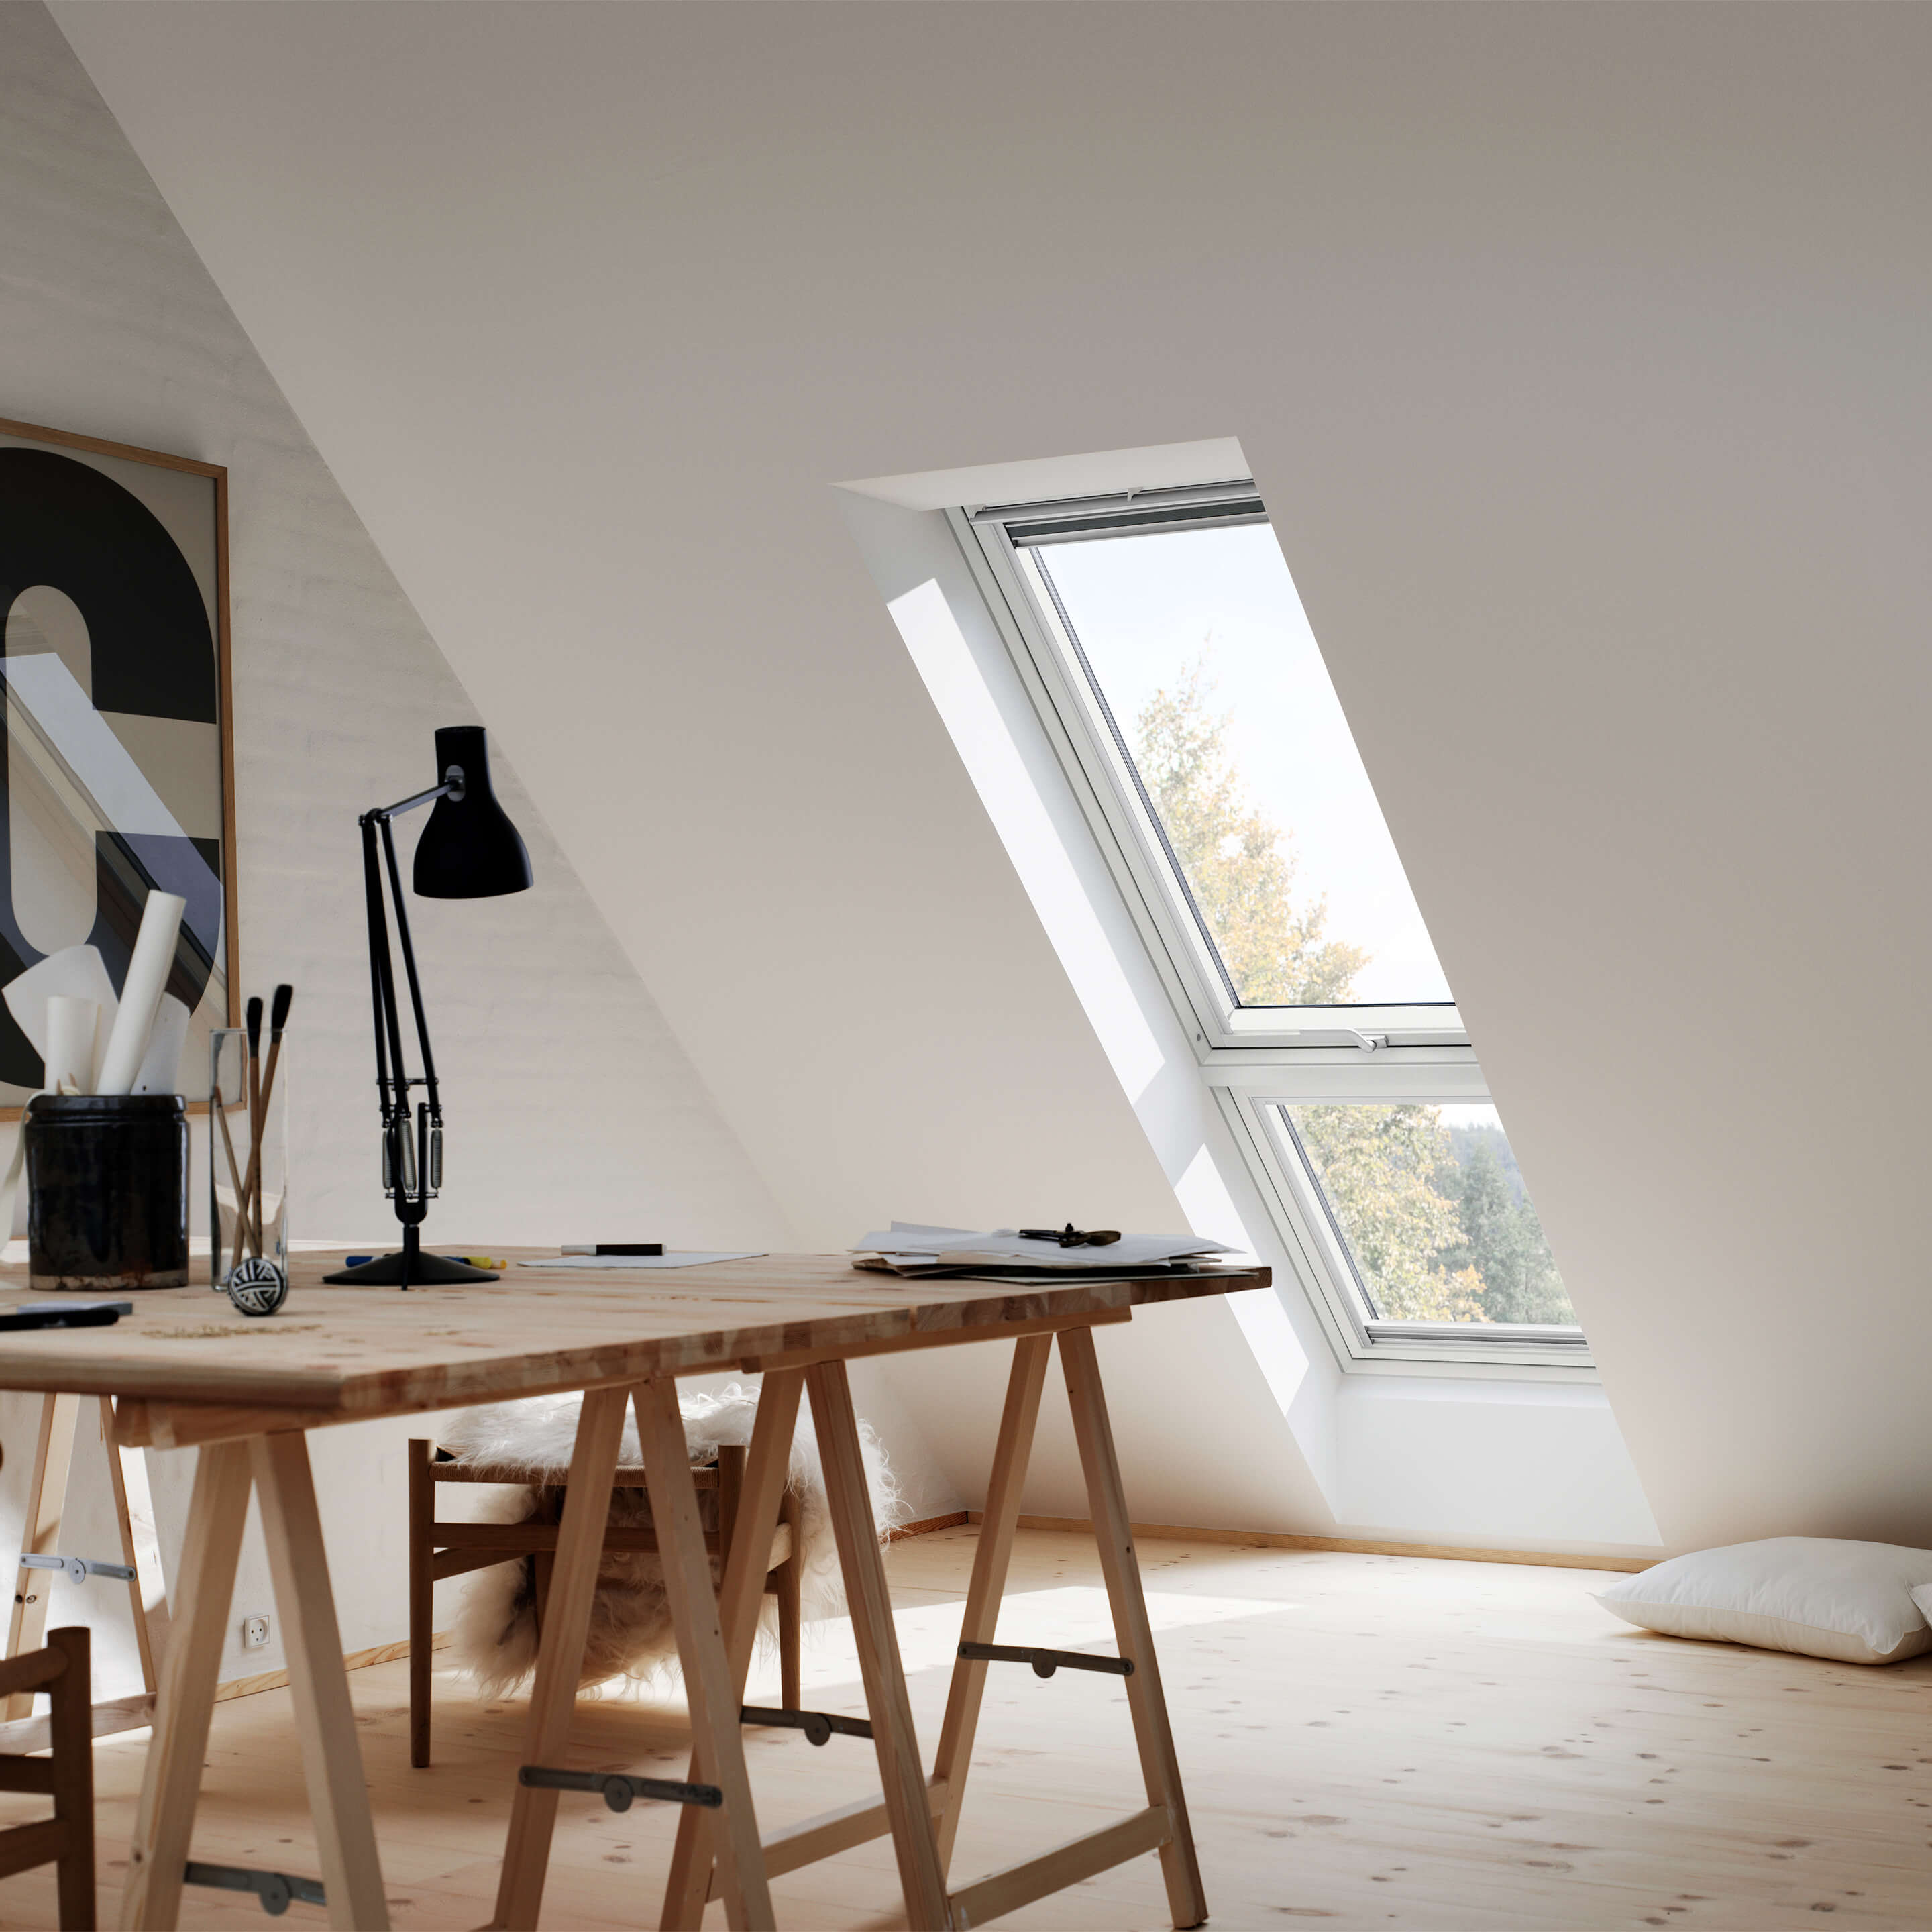 //sc10103.azureedge.net/-/media/products/1-1/sloped-roof-window/multiple/velux-duo-sloped-extension.jpg?cx=0.5&cy=0.5